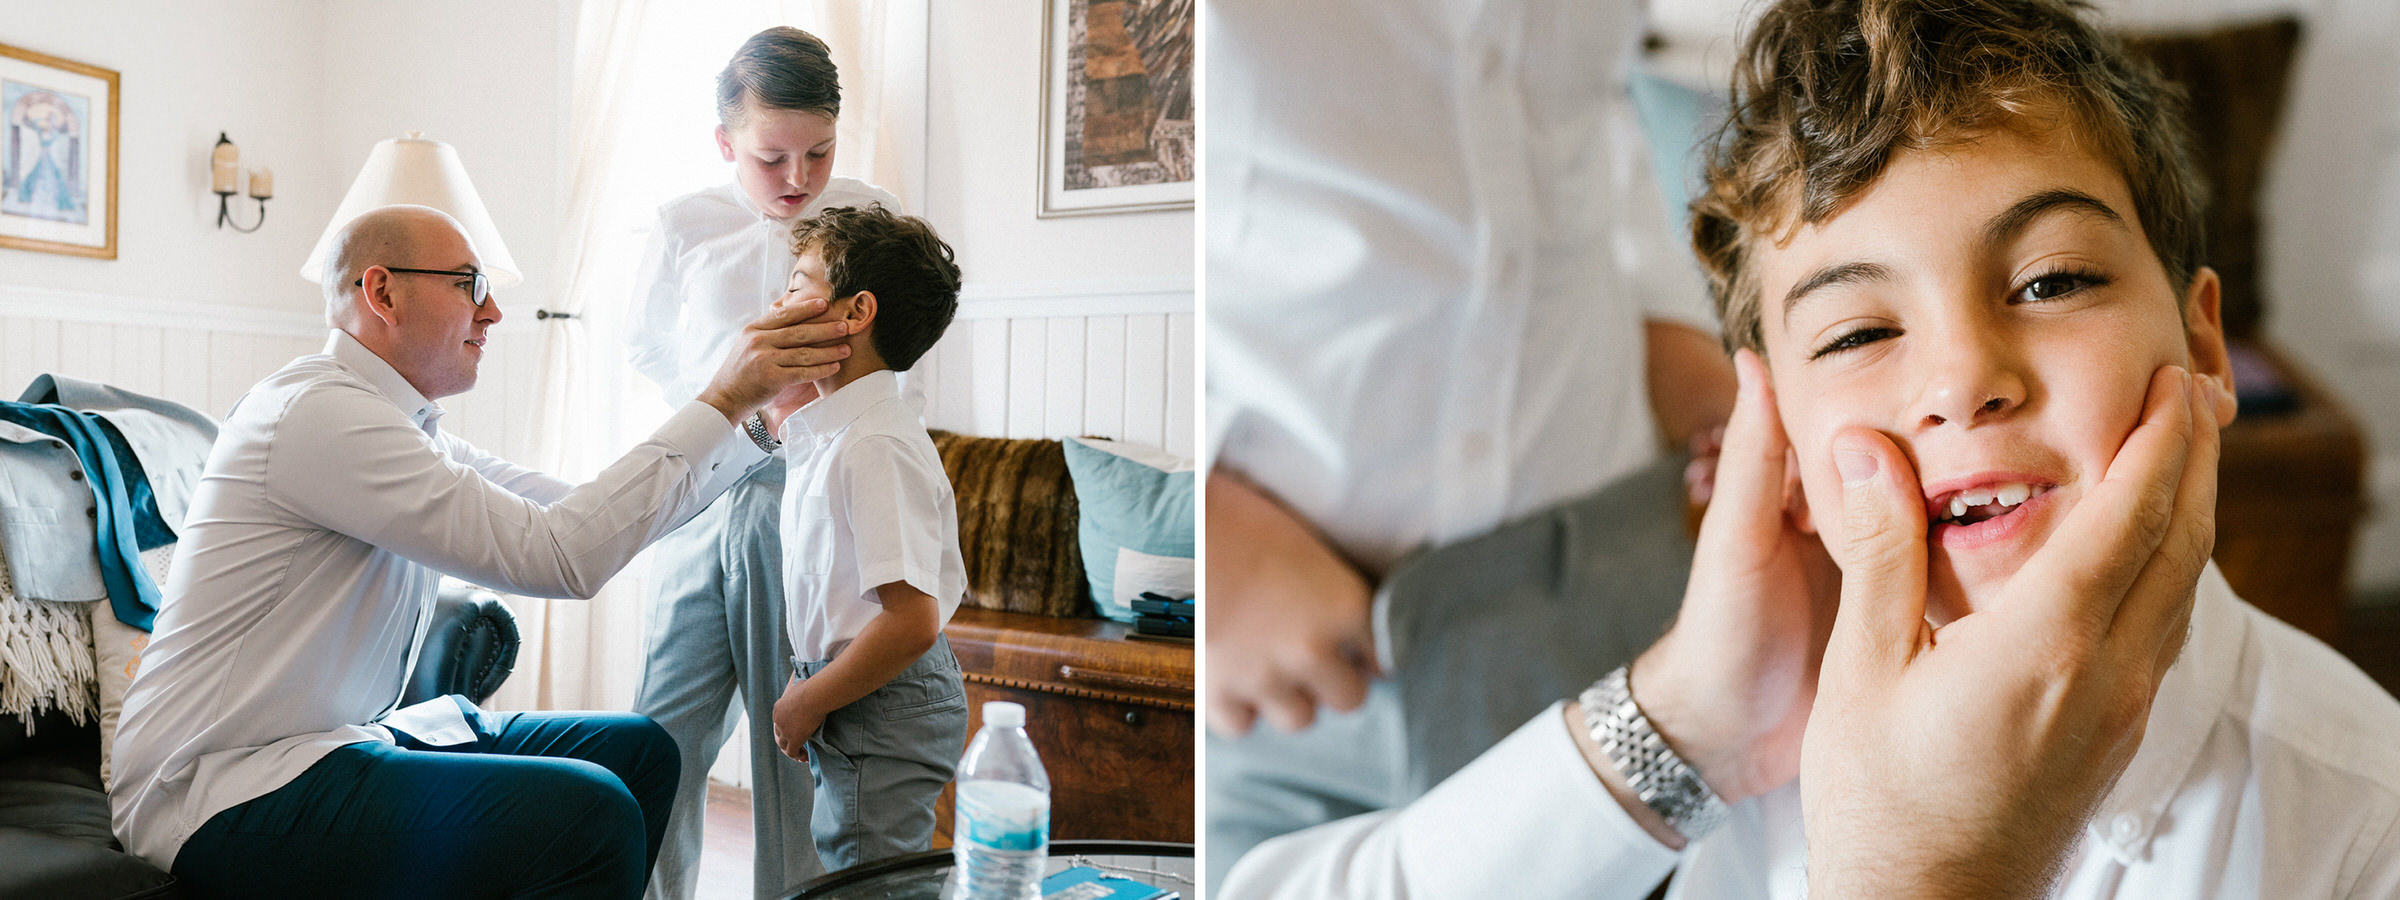 Wayfarer Whidbey Island Wedding: Funny candids of the groom and his sons getting ready.